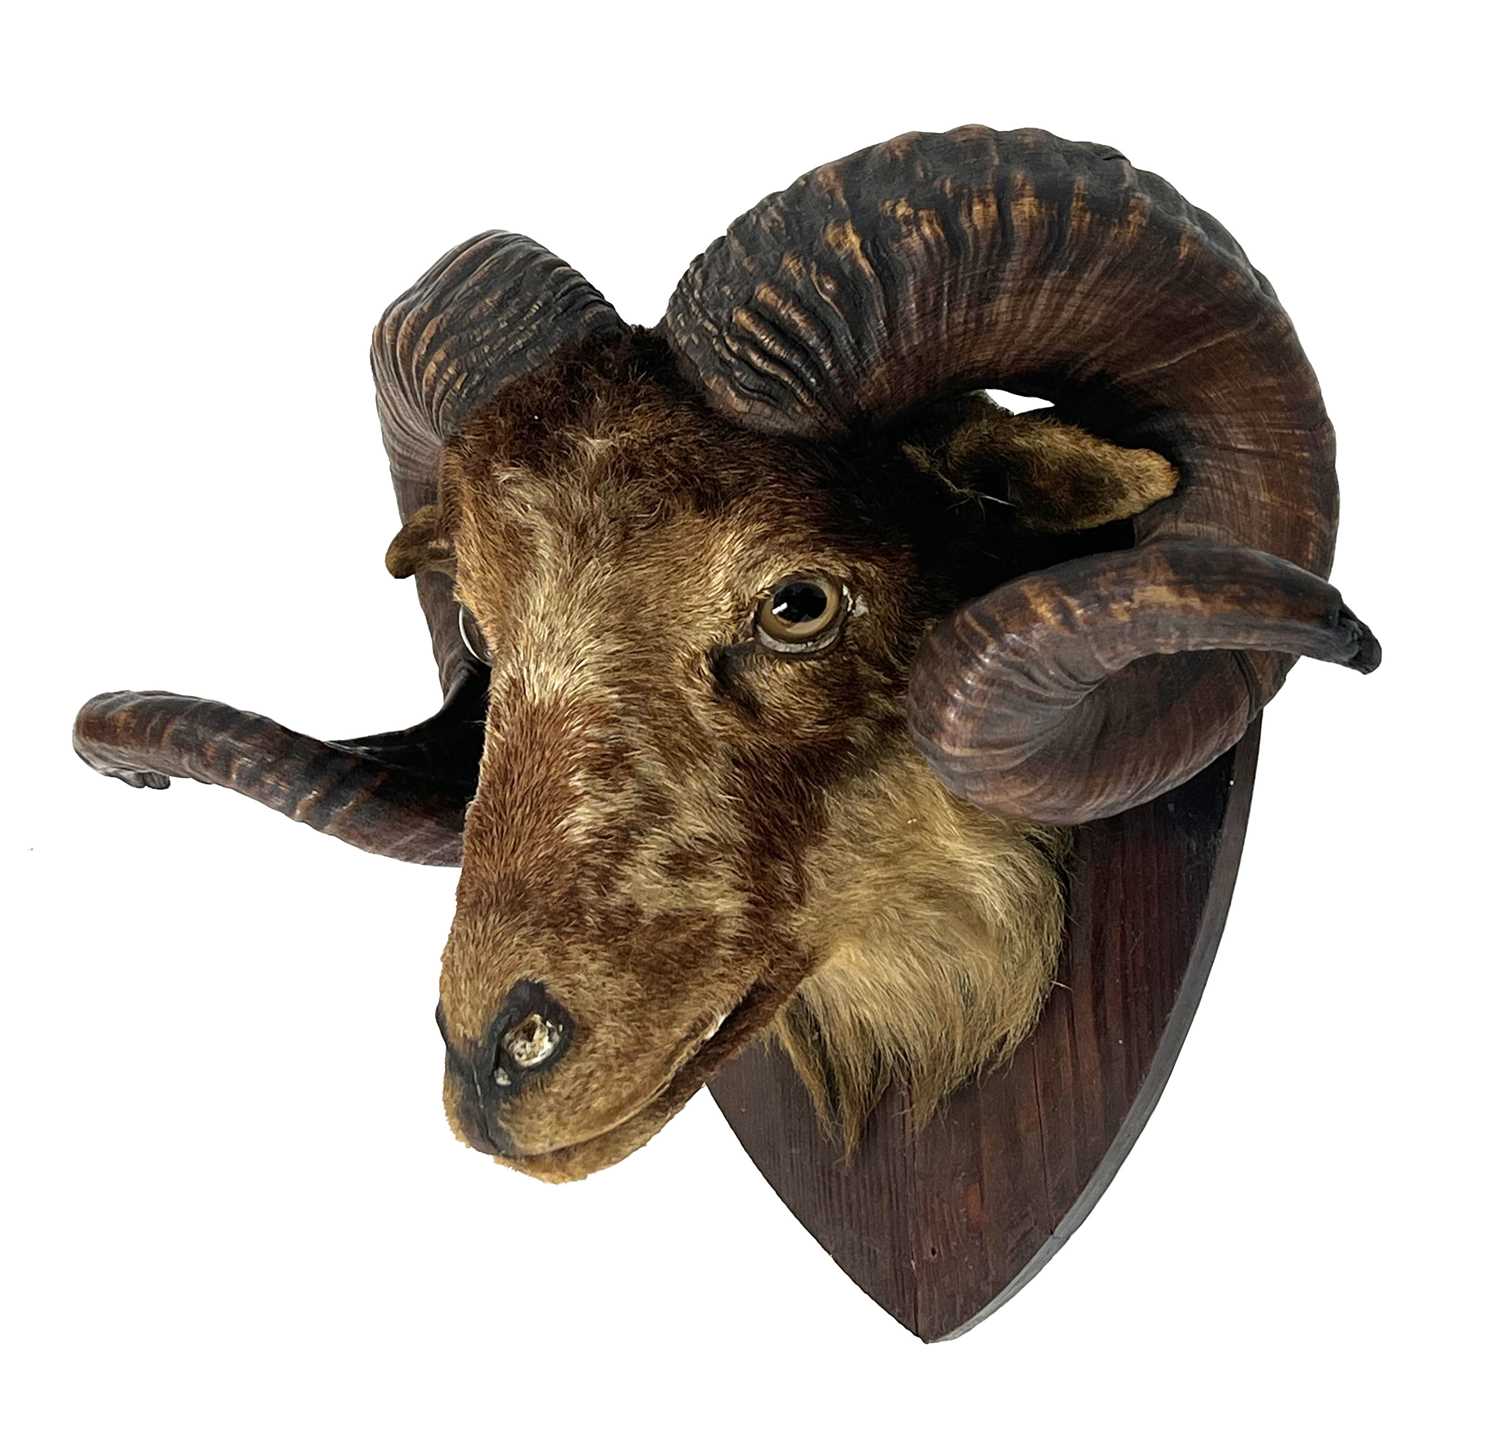 Taxidermy: A Late Victorian Sheep Head Mount (Ovis aries), circa 1880-1900, an adult rams head - Image 2 of 3